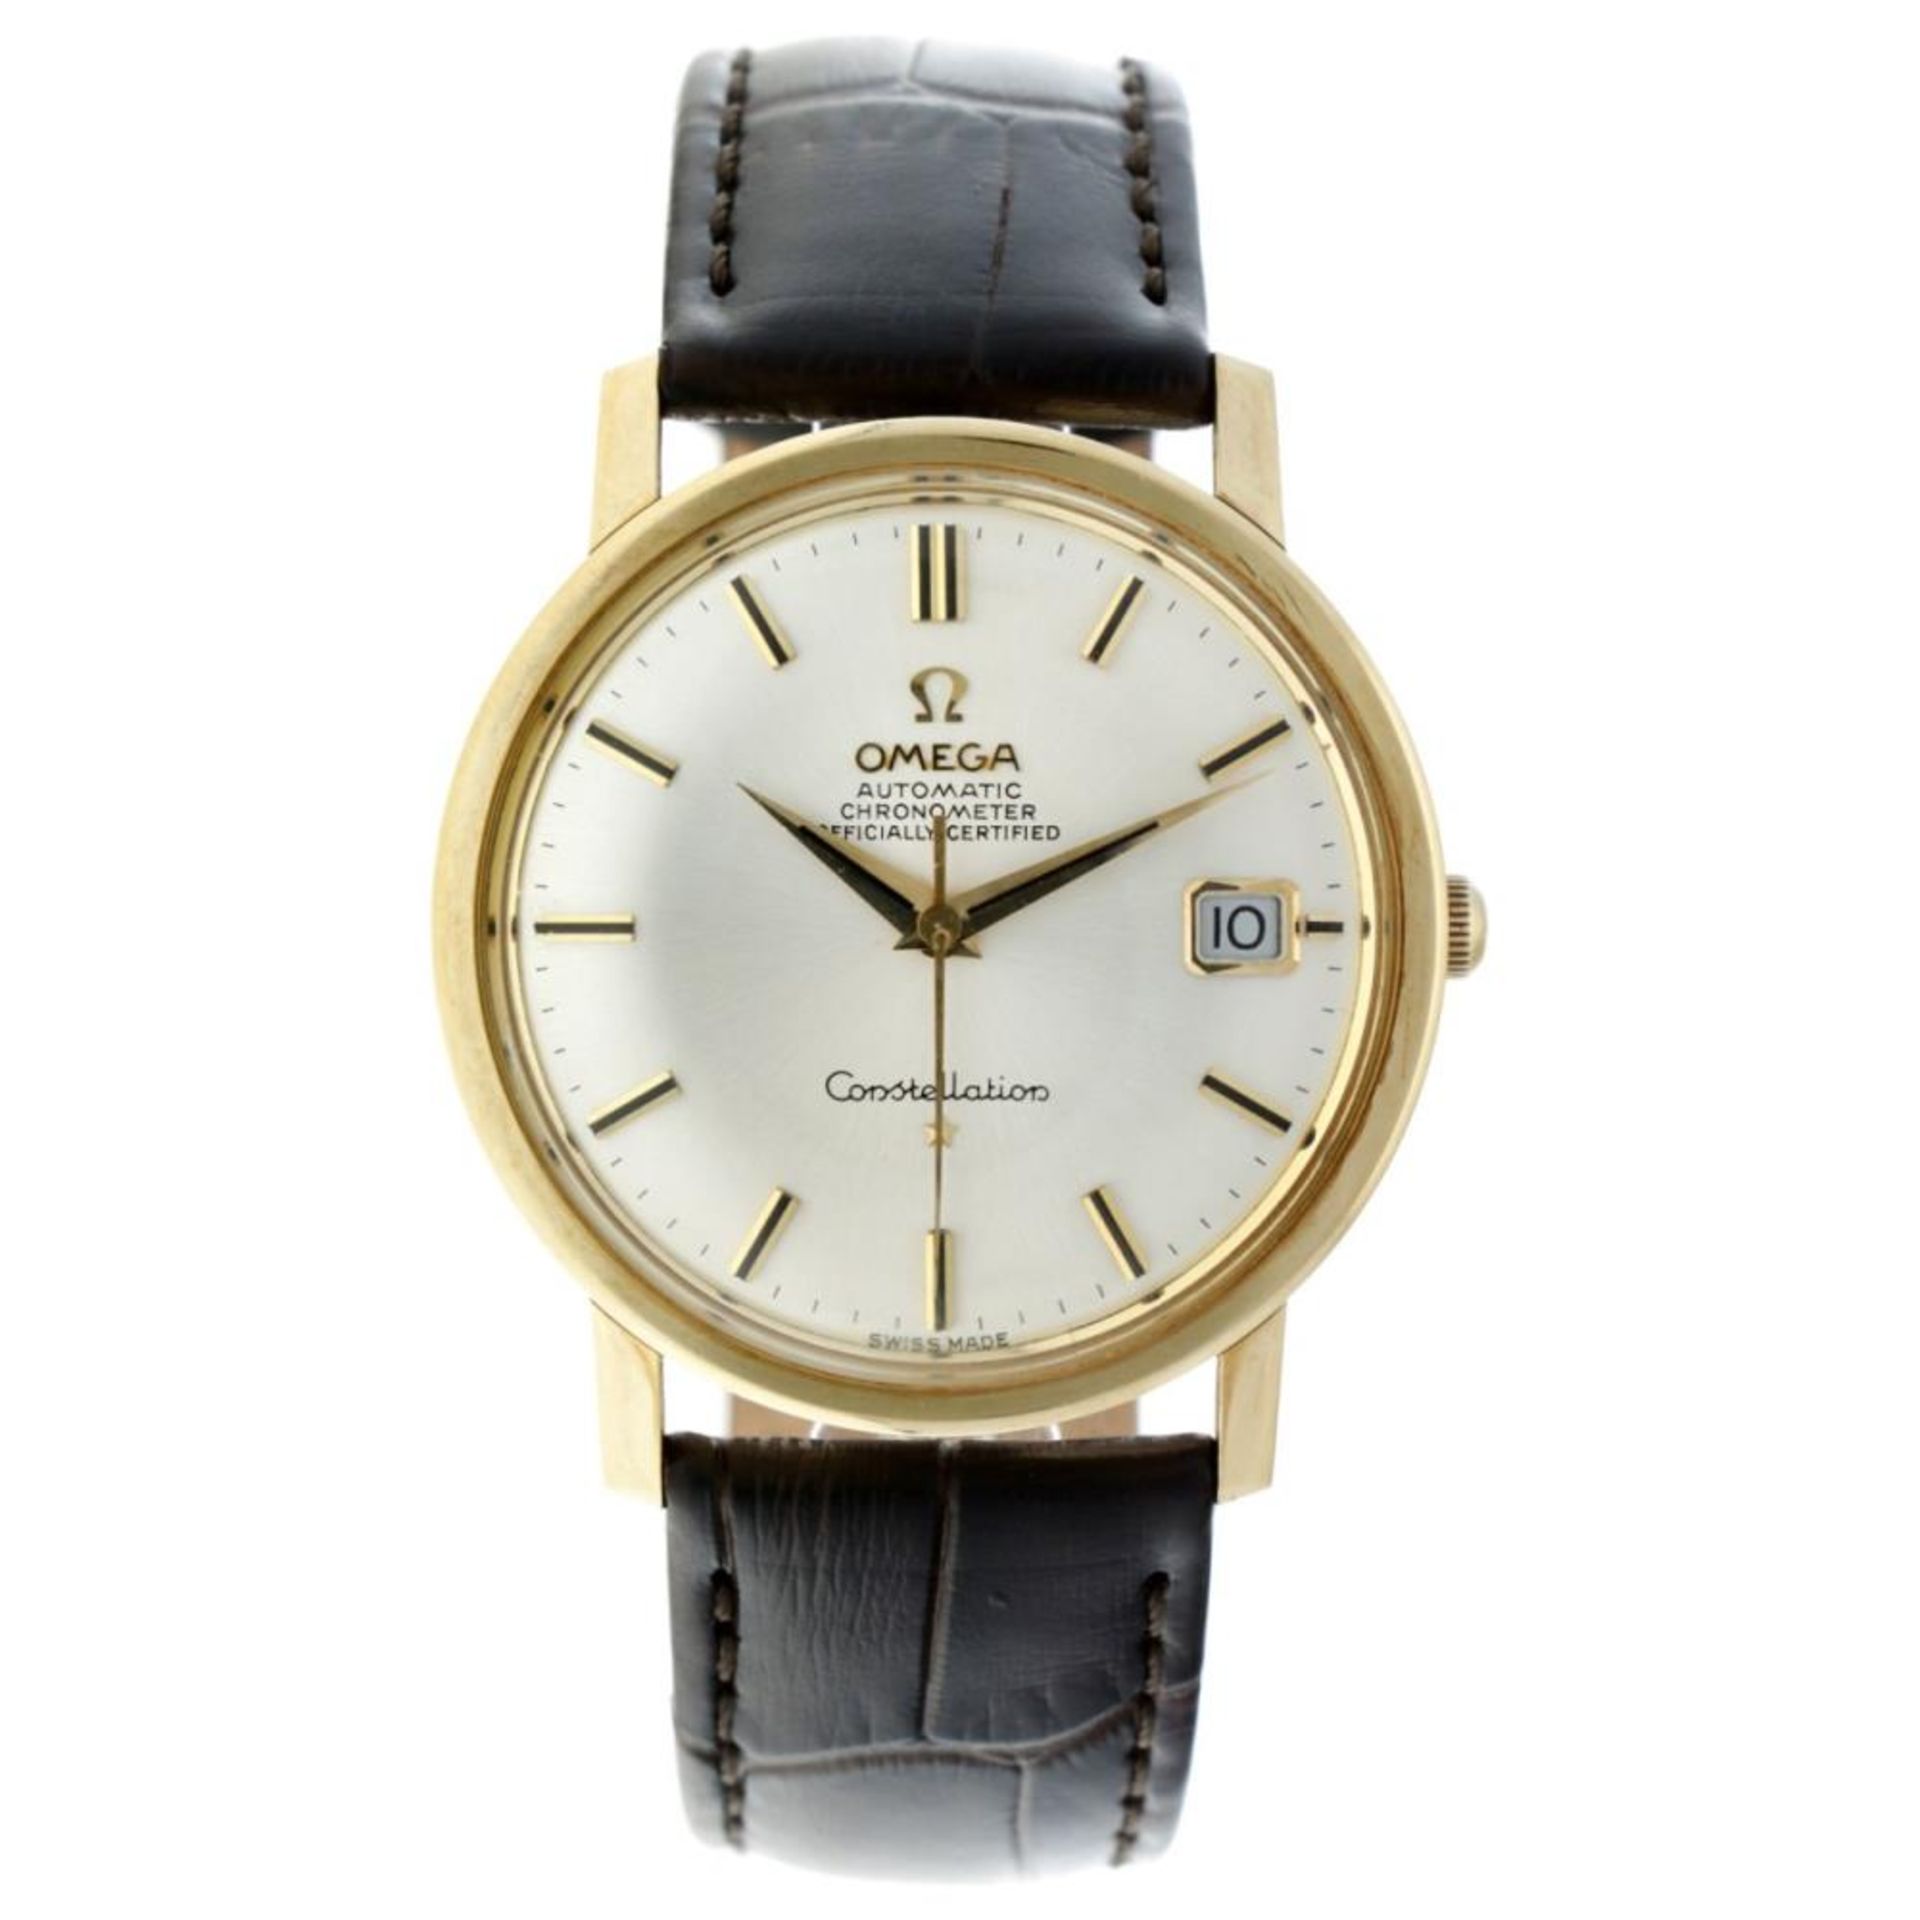 Omega Constellation 168.010 - Zelim Jacot dial - Men's watch - approx. 1967.